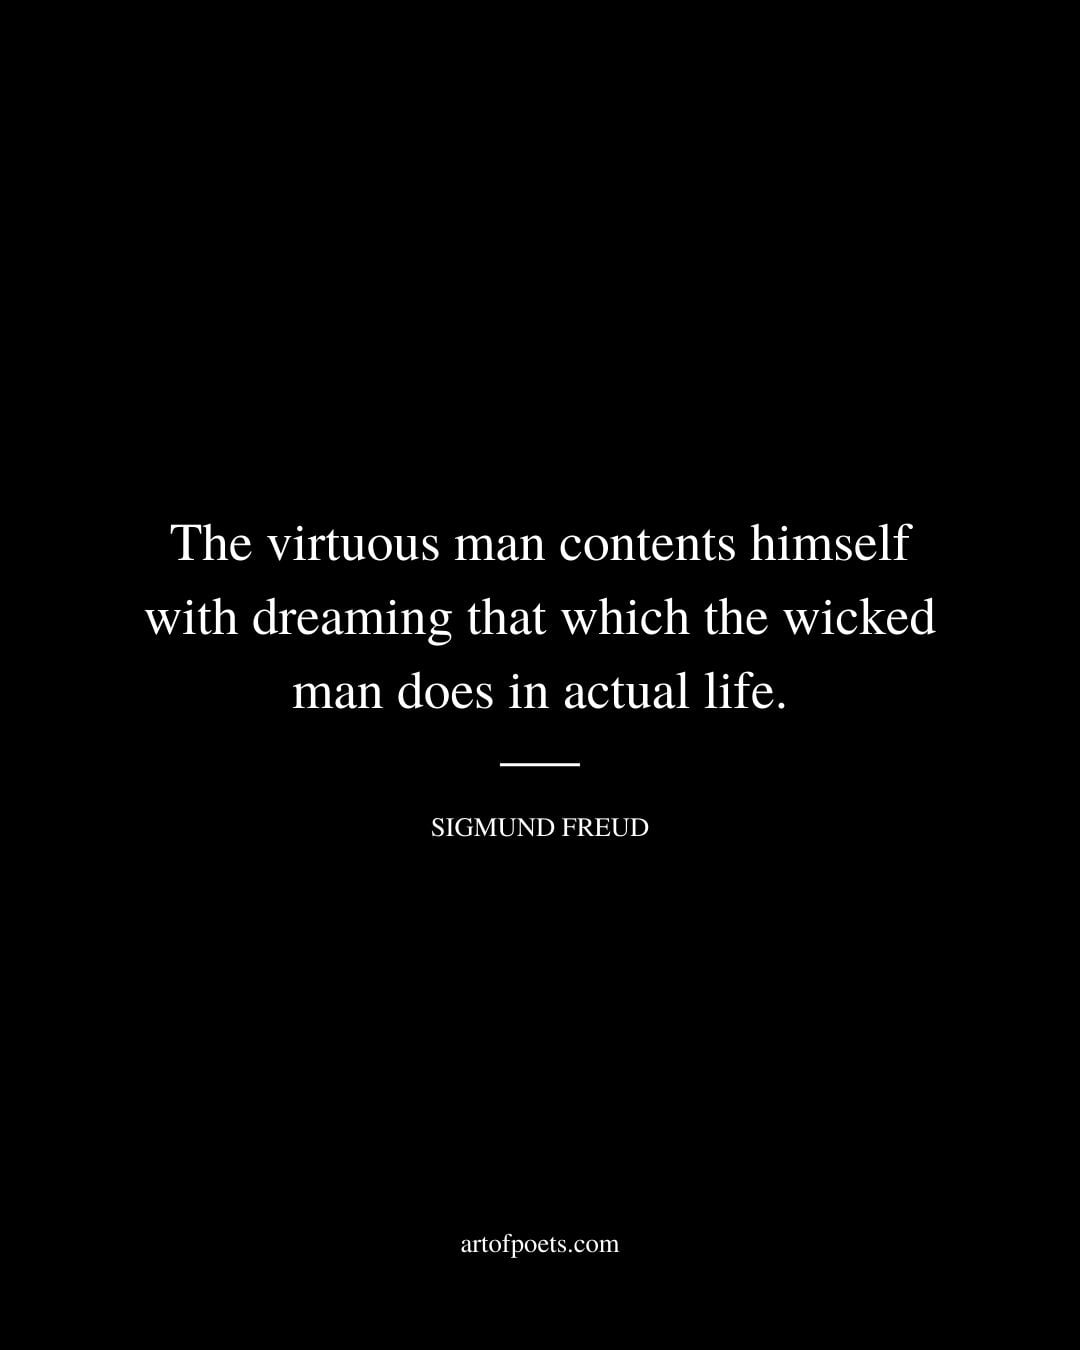 The virtuous man contents himself with dreaming that which the wicked man does in actual life. Sigmund Freud